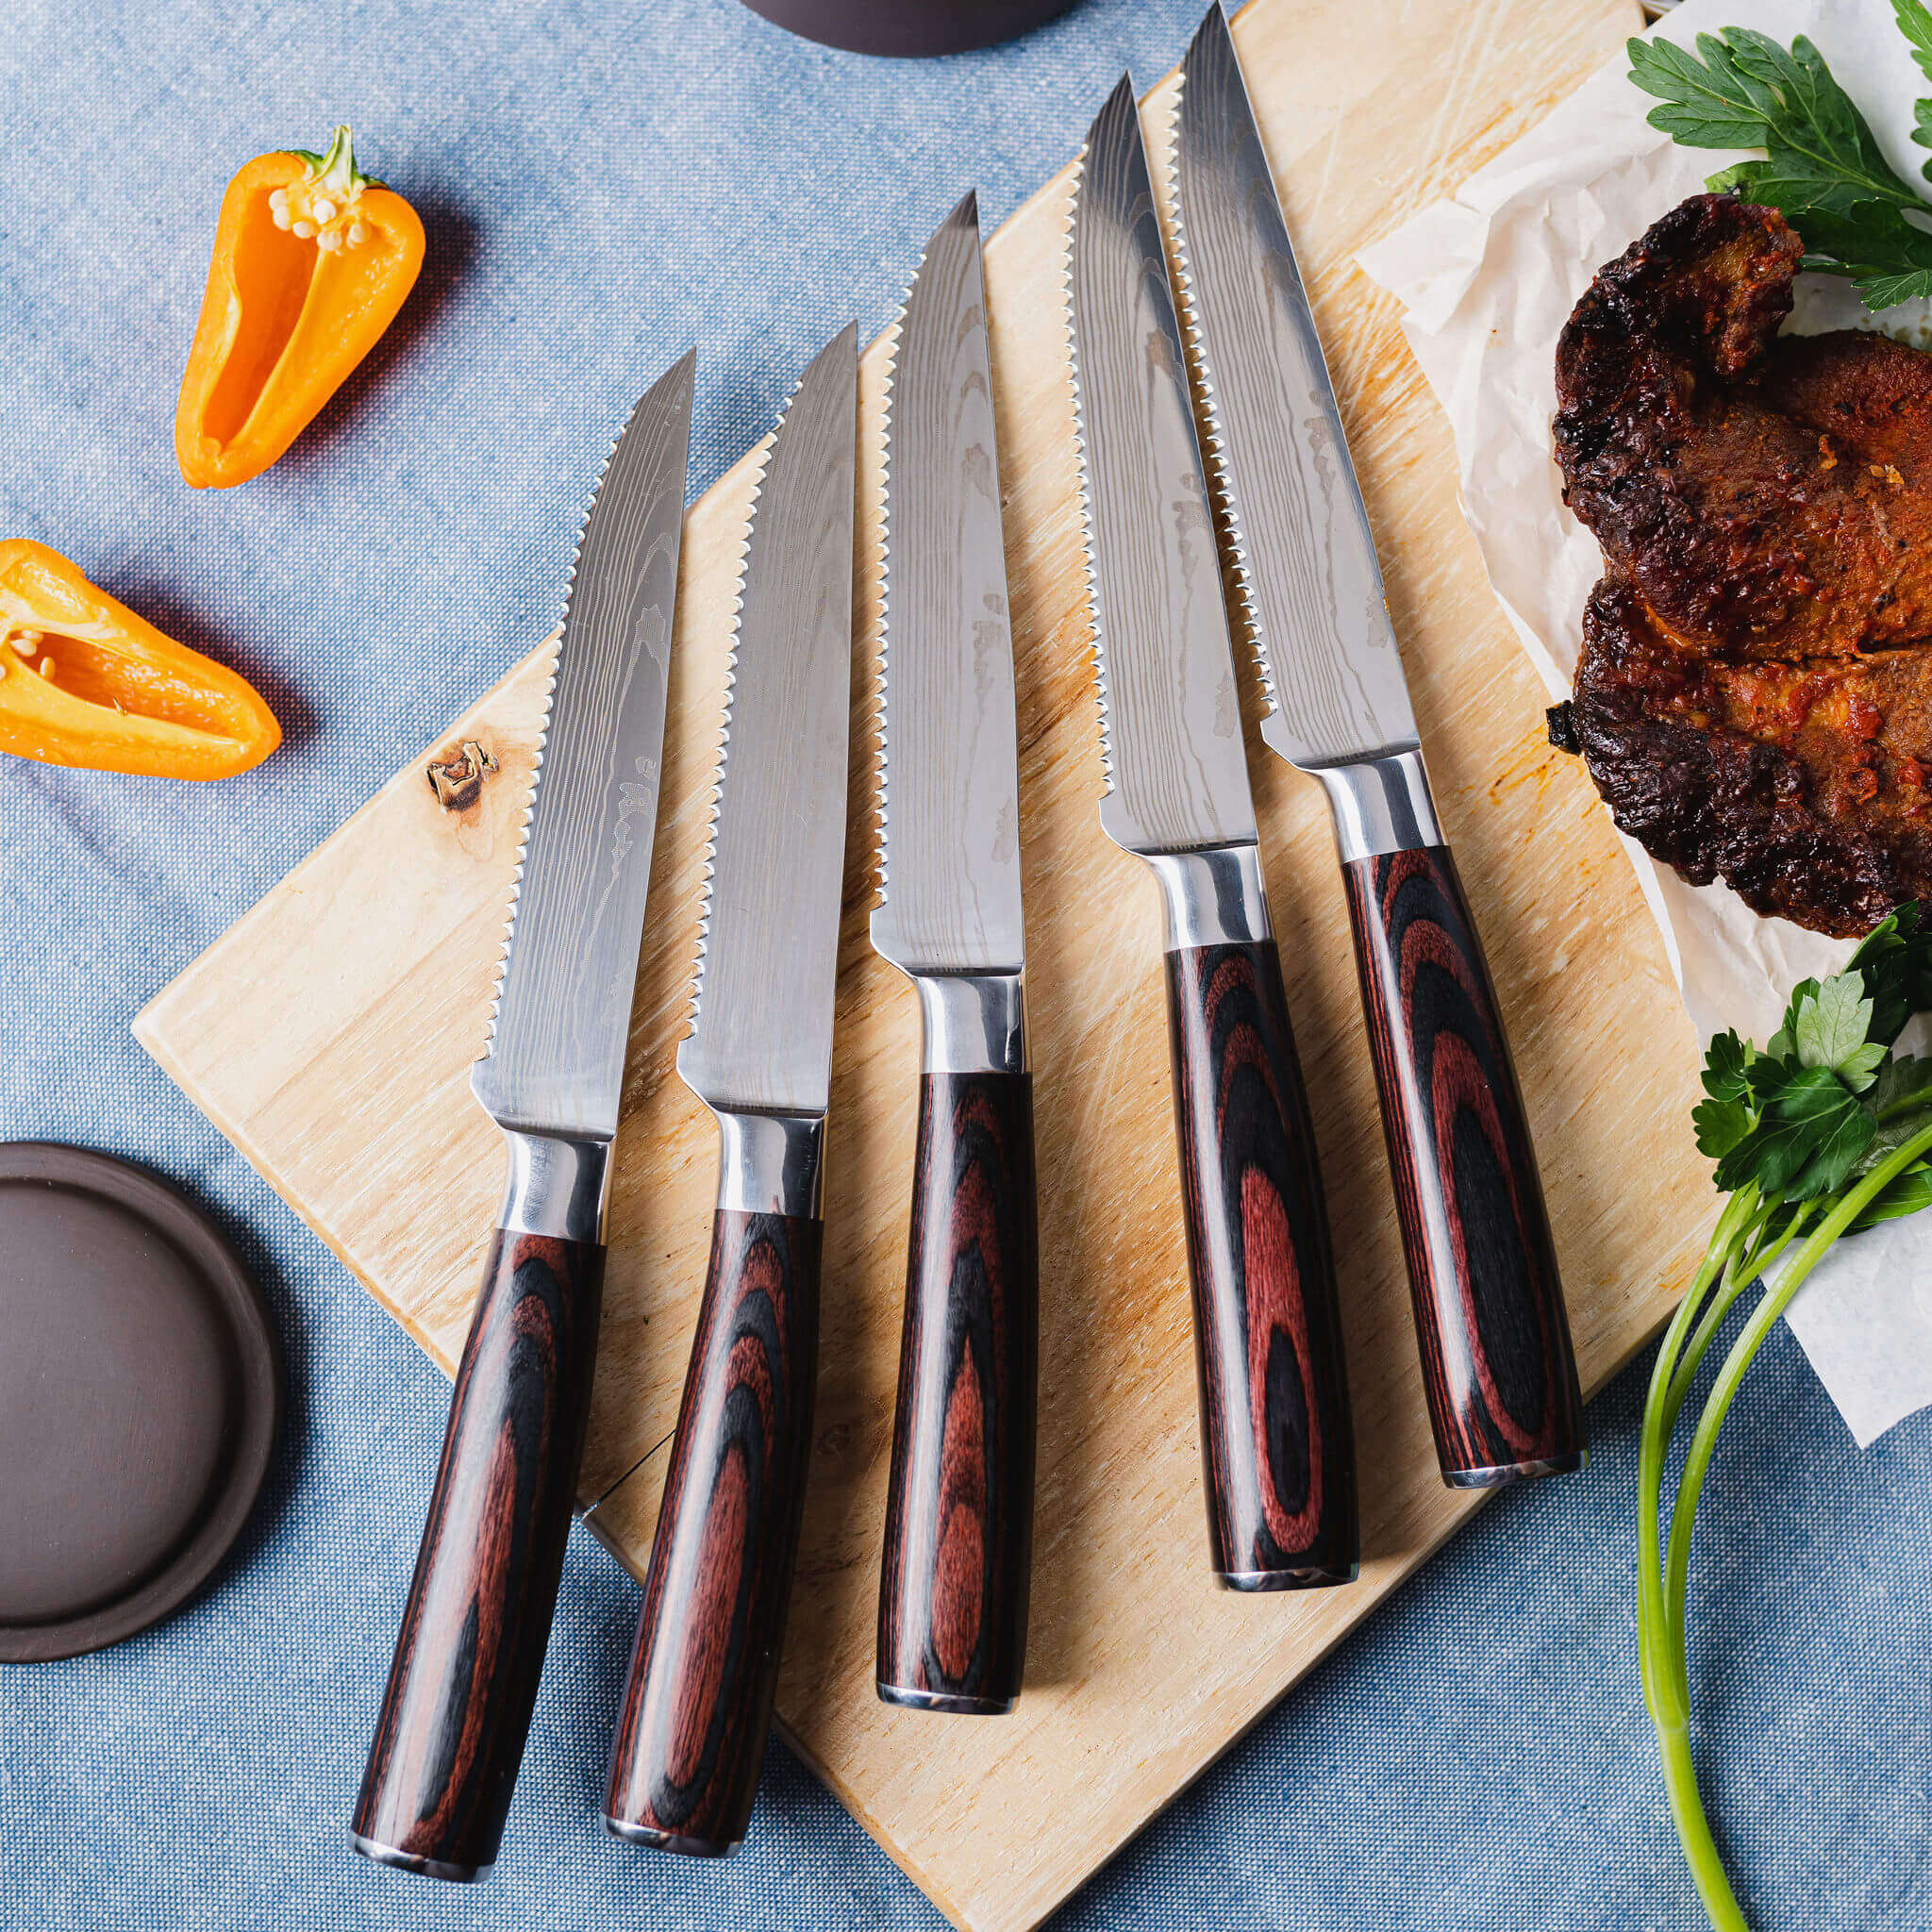 5-Piece Seido Steak knives on a table with meat